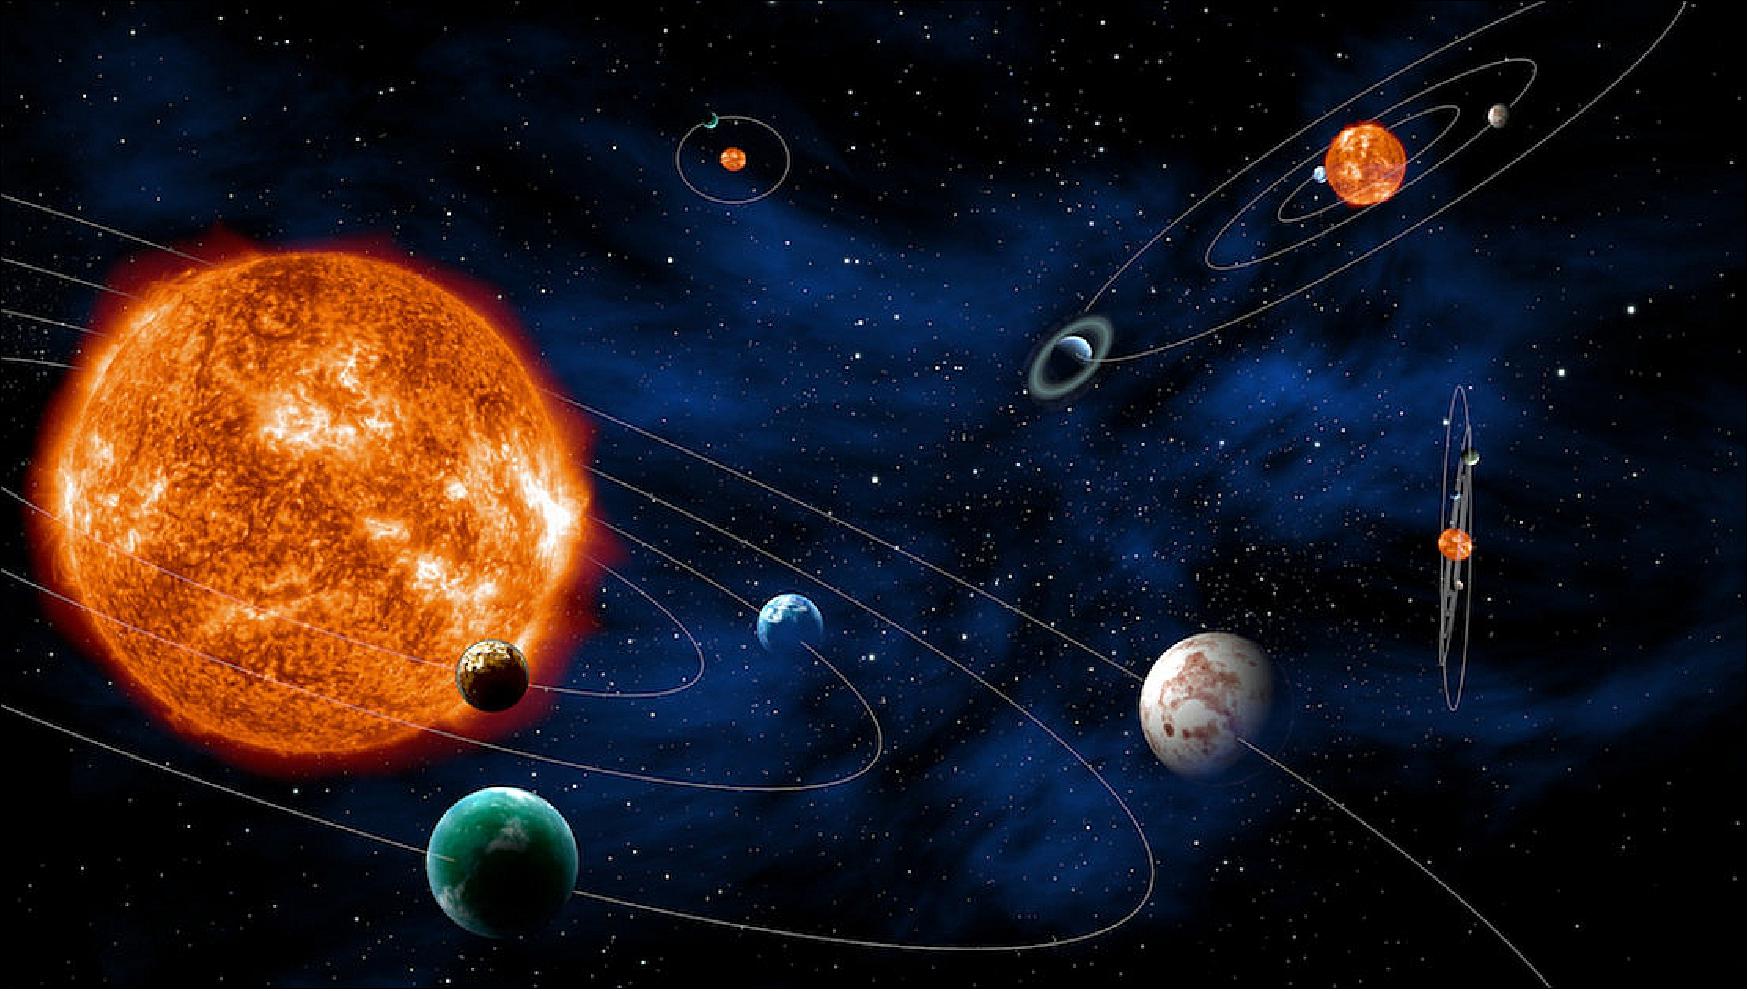 Figure 2: The PLATO mission will identify and study thousands of exoplanetary systems, with an emphasis on discovering and characterizing Earth-sized planets and super-Earths. It will also investigate seismic activity in stars, enabling a precise characterization of the host sun of each planet discovered, including its mass, radius and age (image credit: ESA–C. Carreau) 6)